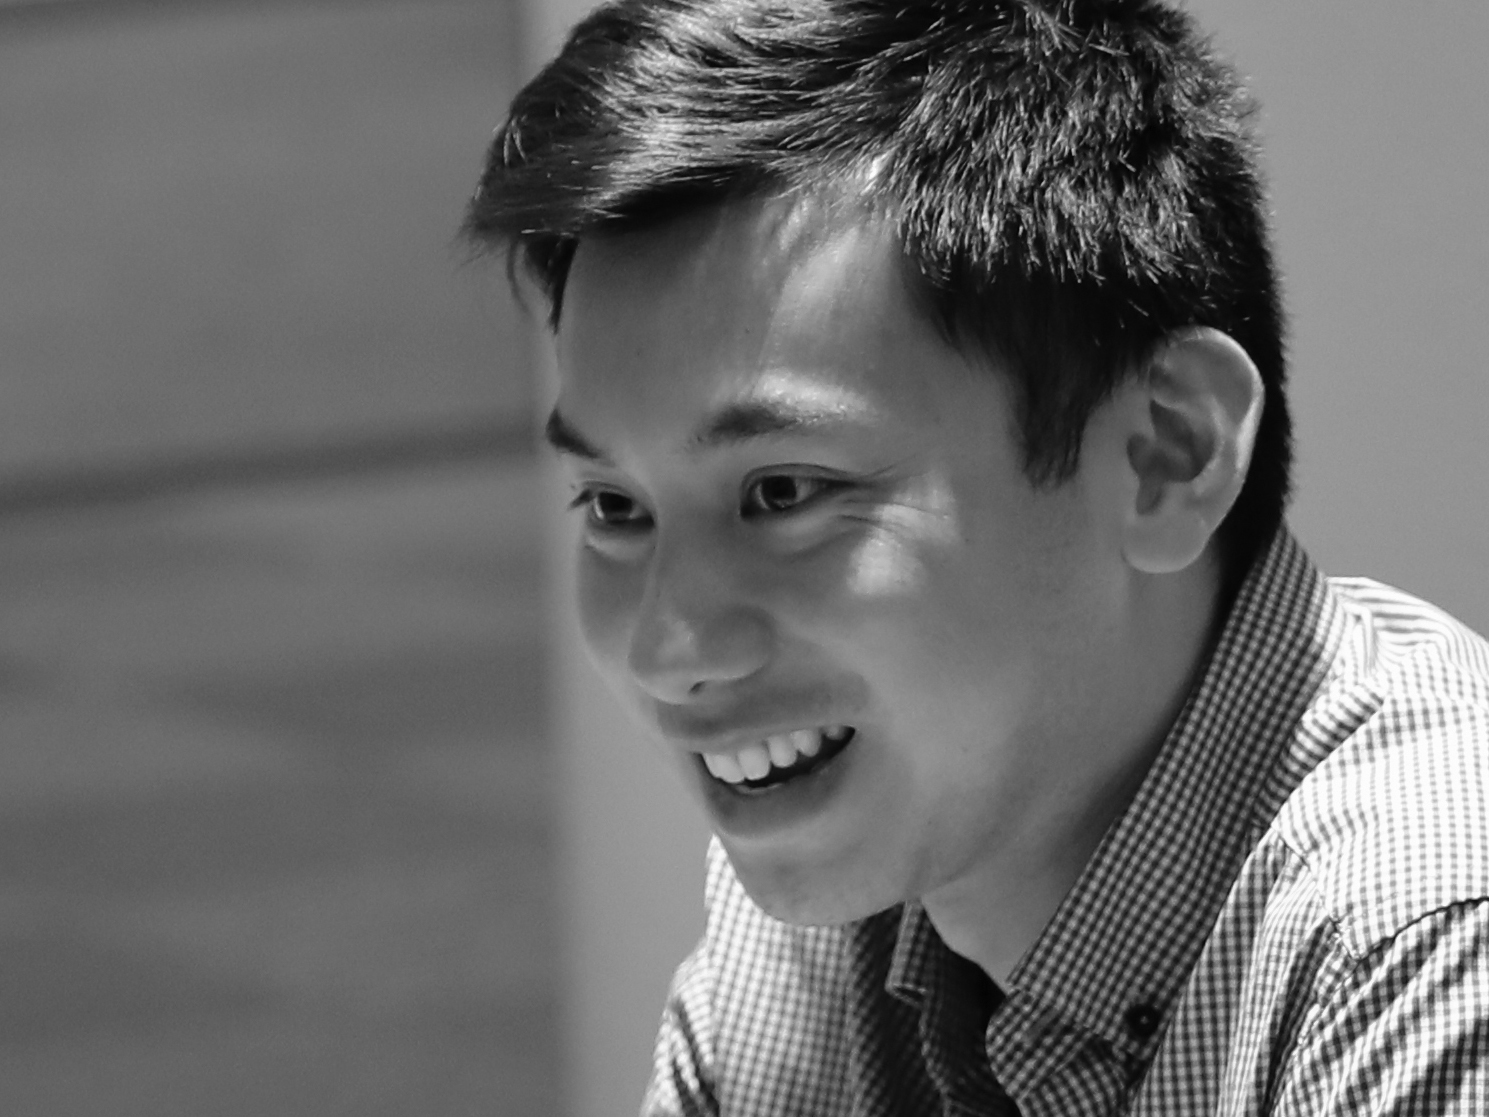 Episode 59 HY William Chan talks about how architecture and the design